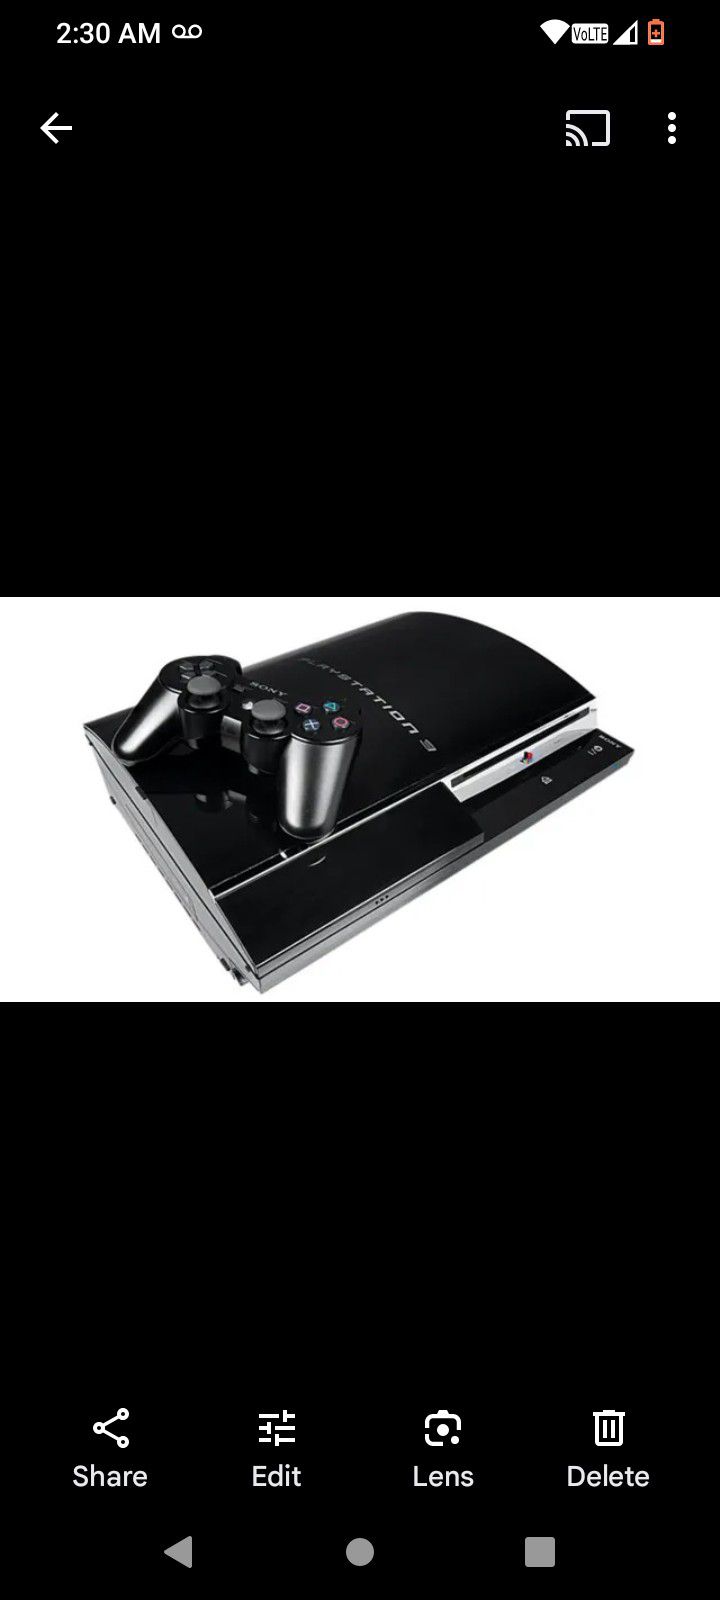 Ps3 Console +3 Controllers